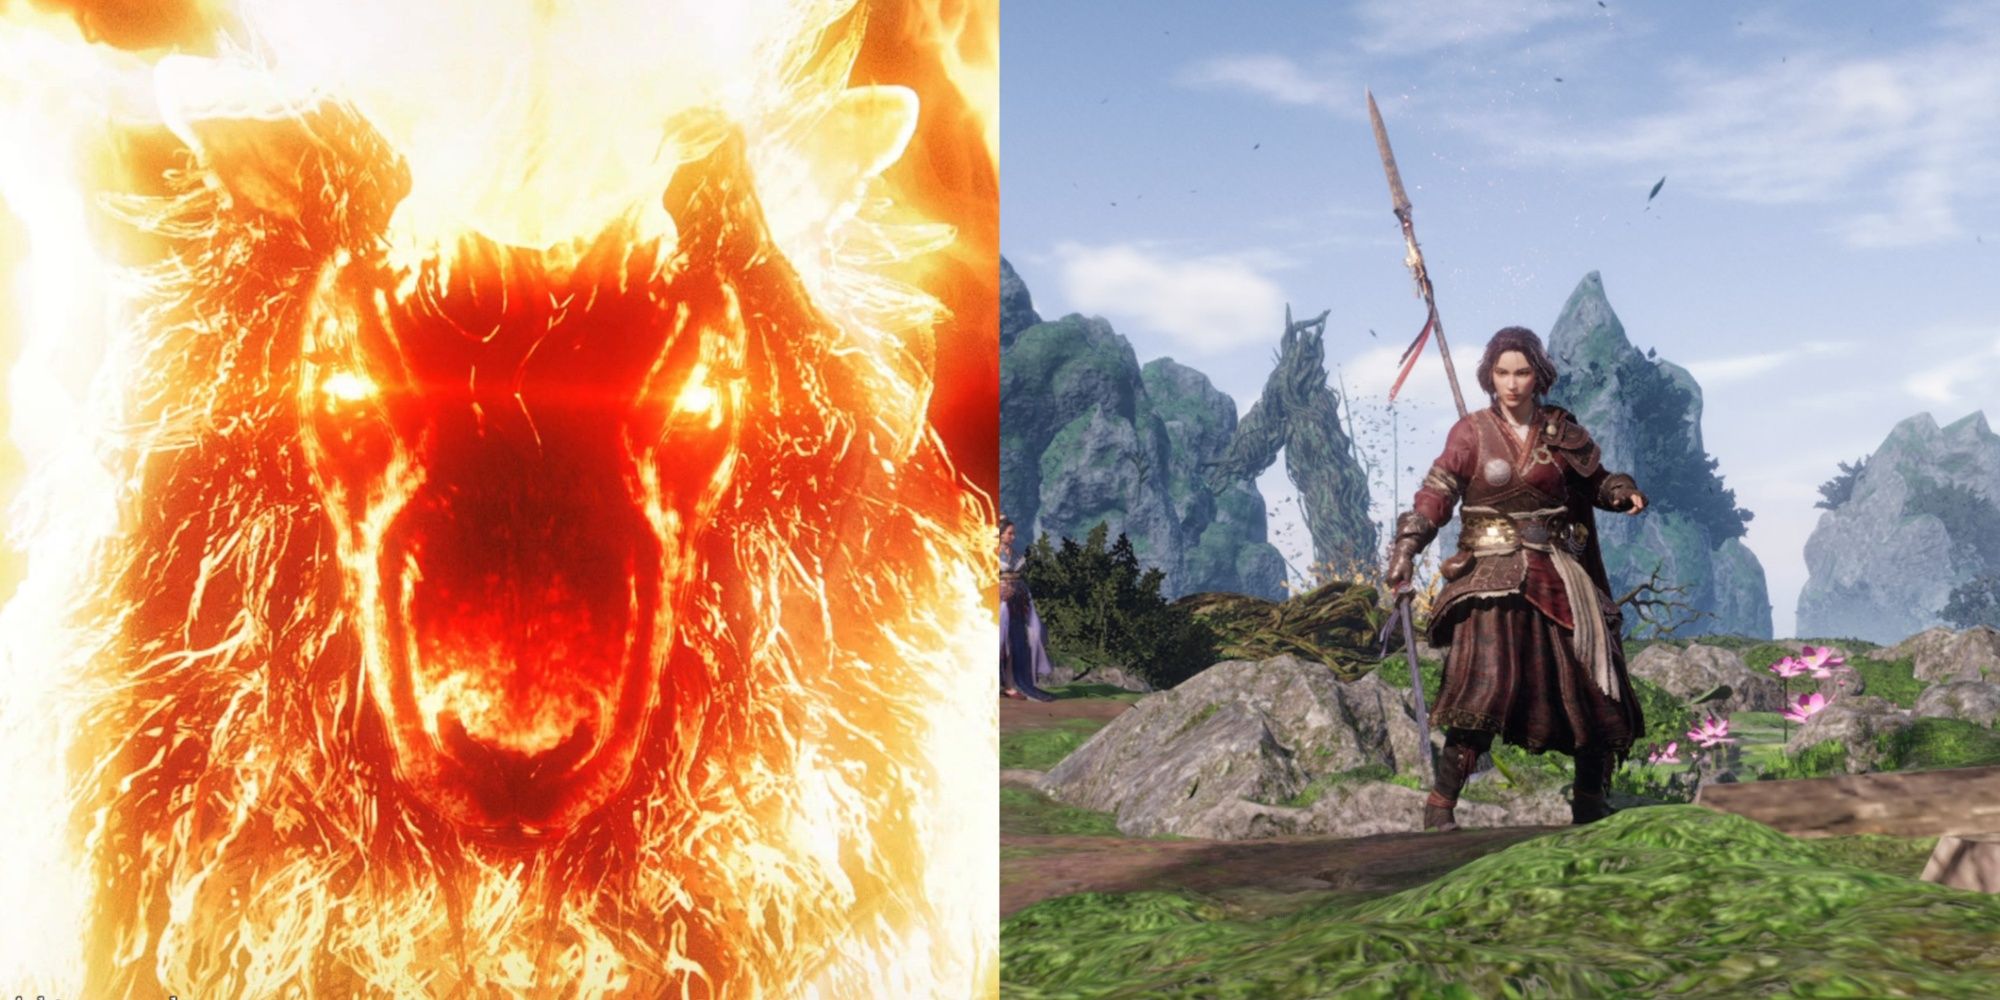 Wo Long: Fallen Dynasty - Divine Beast during a cutscene (left) and our main character in the hidden village (right)